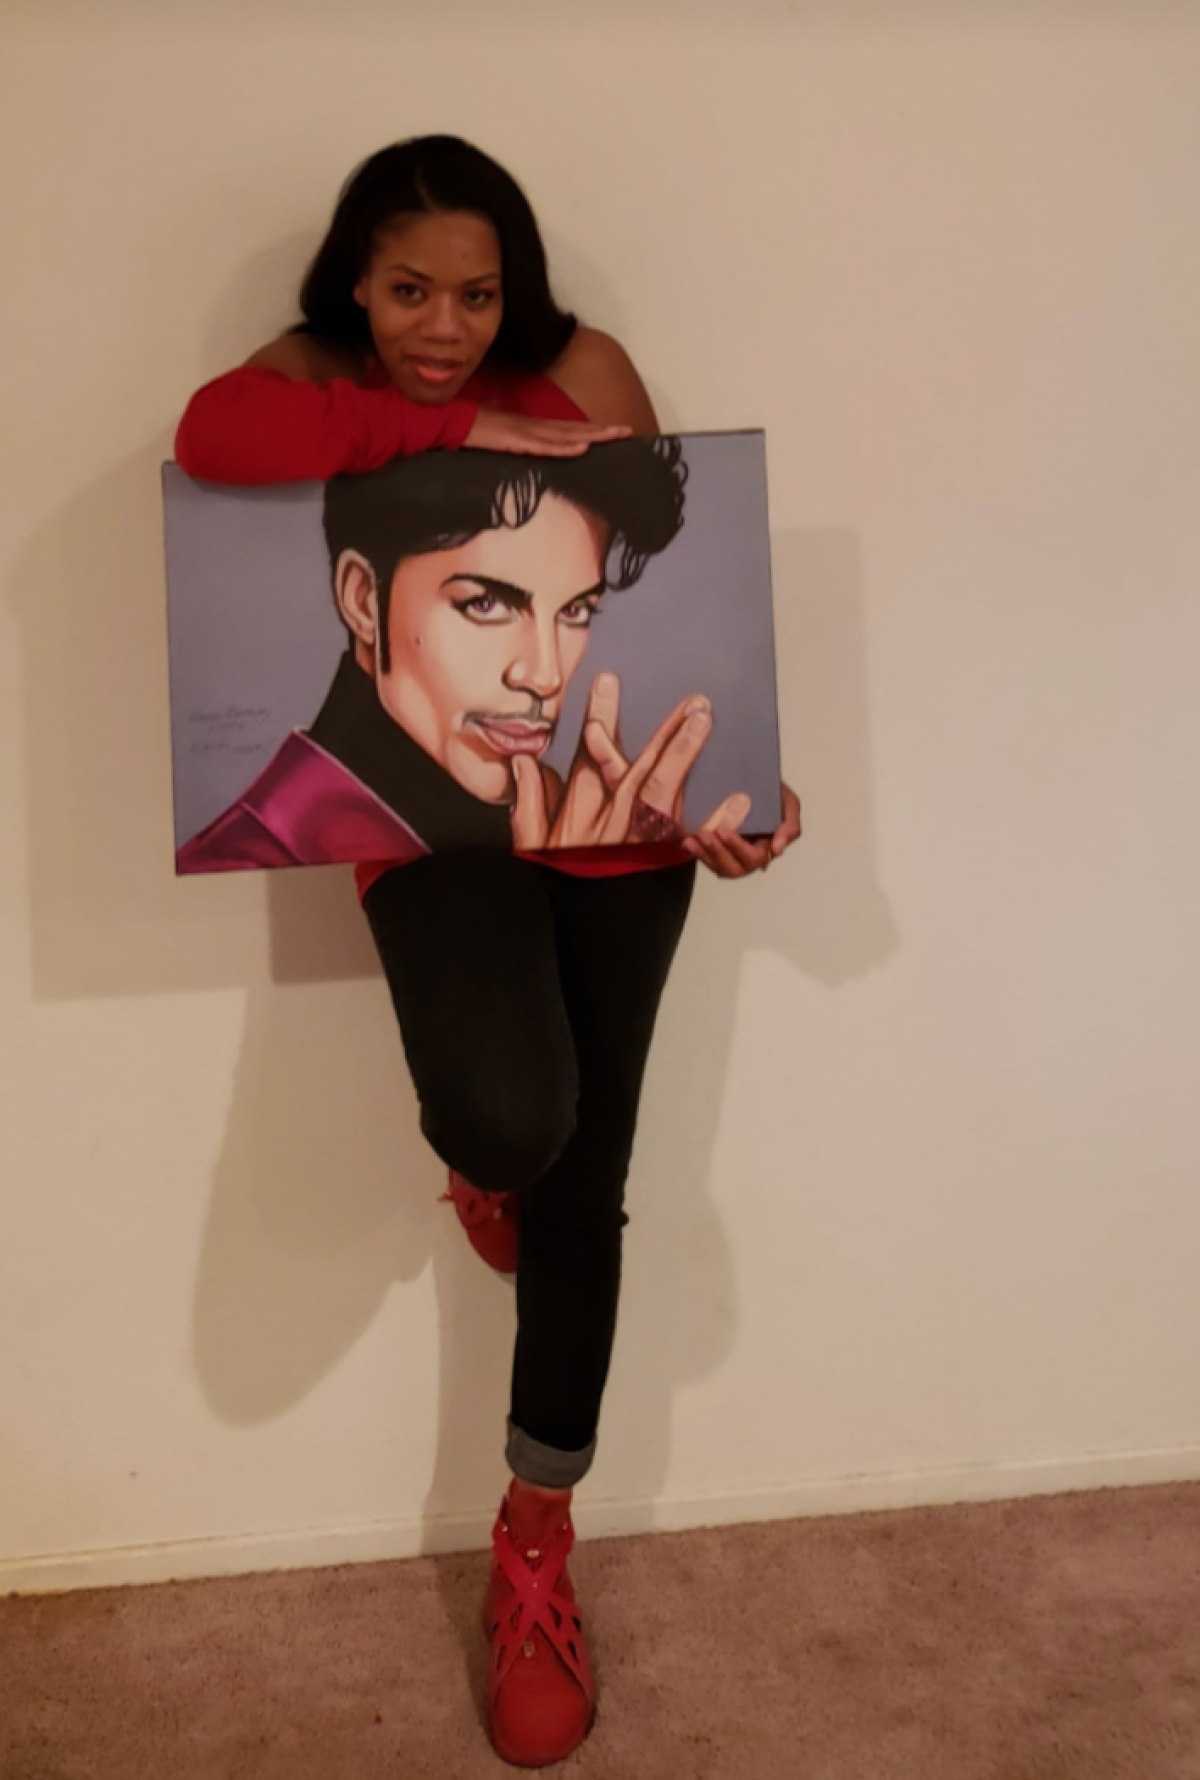 Woman in red shirt, red shoes, and blue jeans holds Prince painting. 